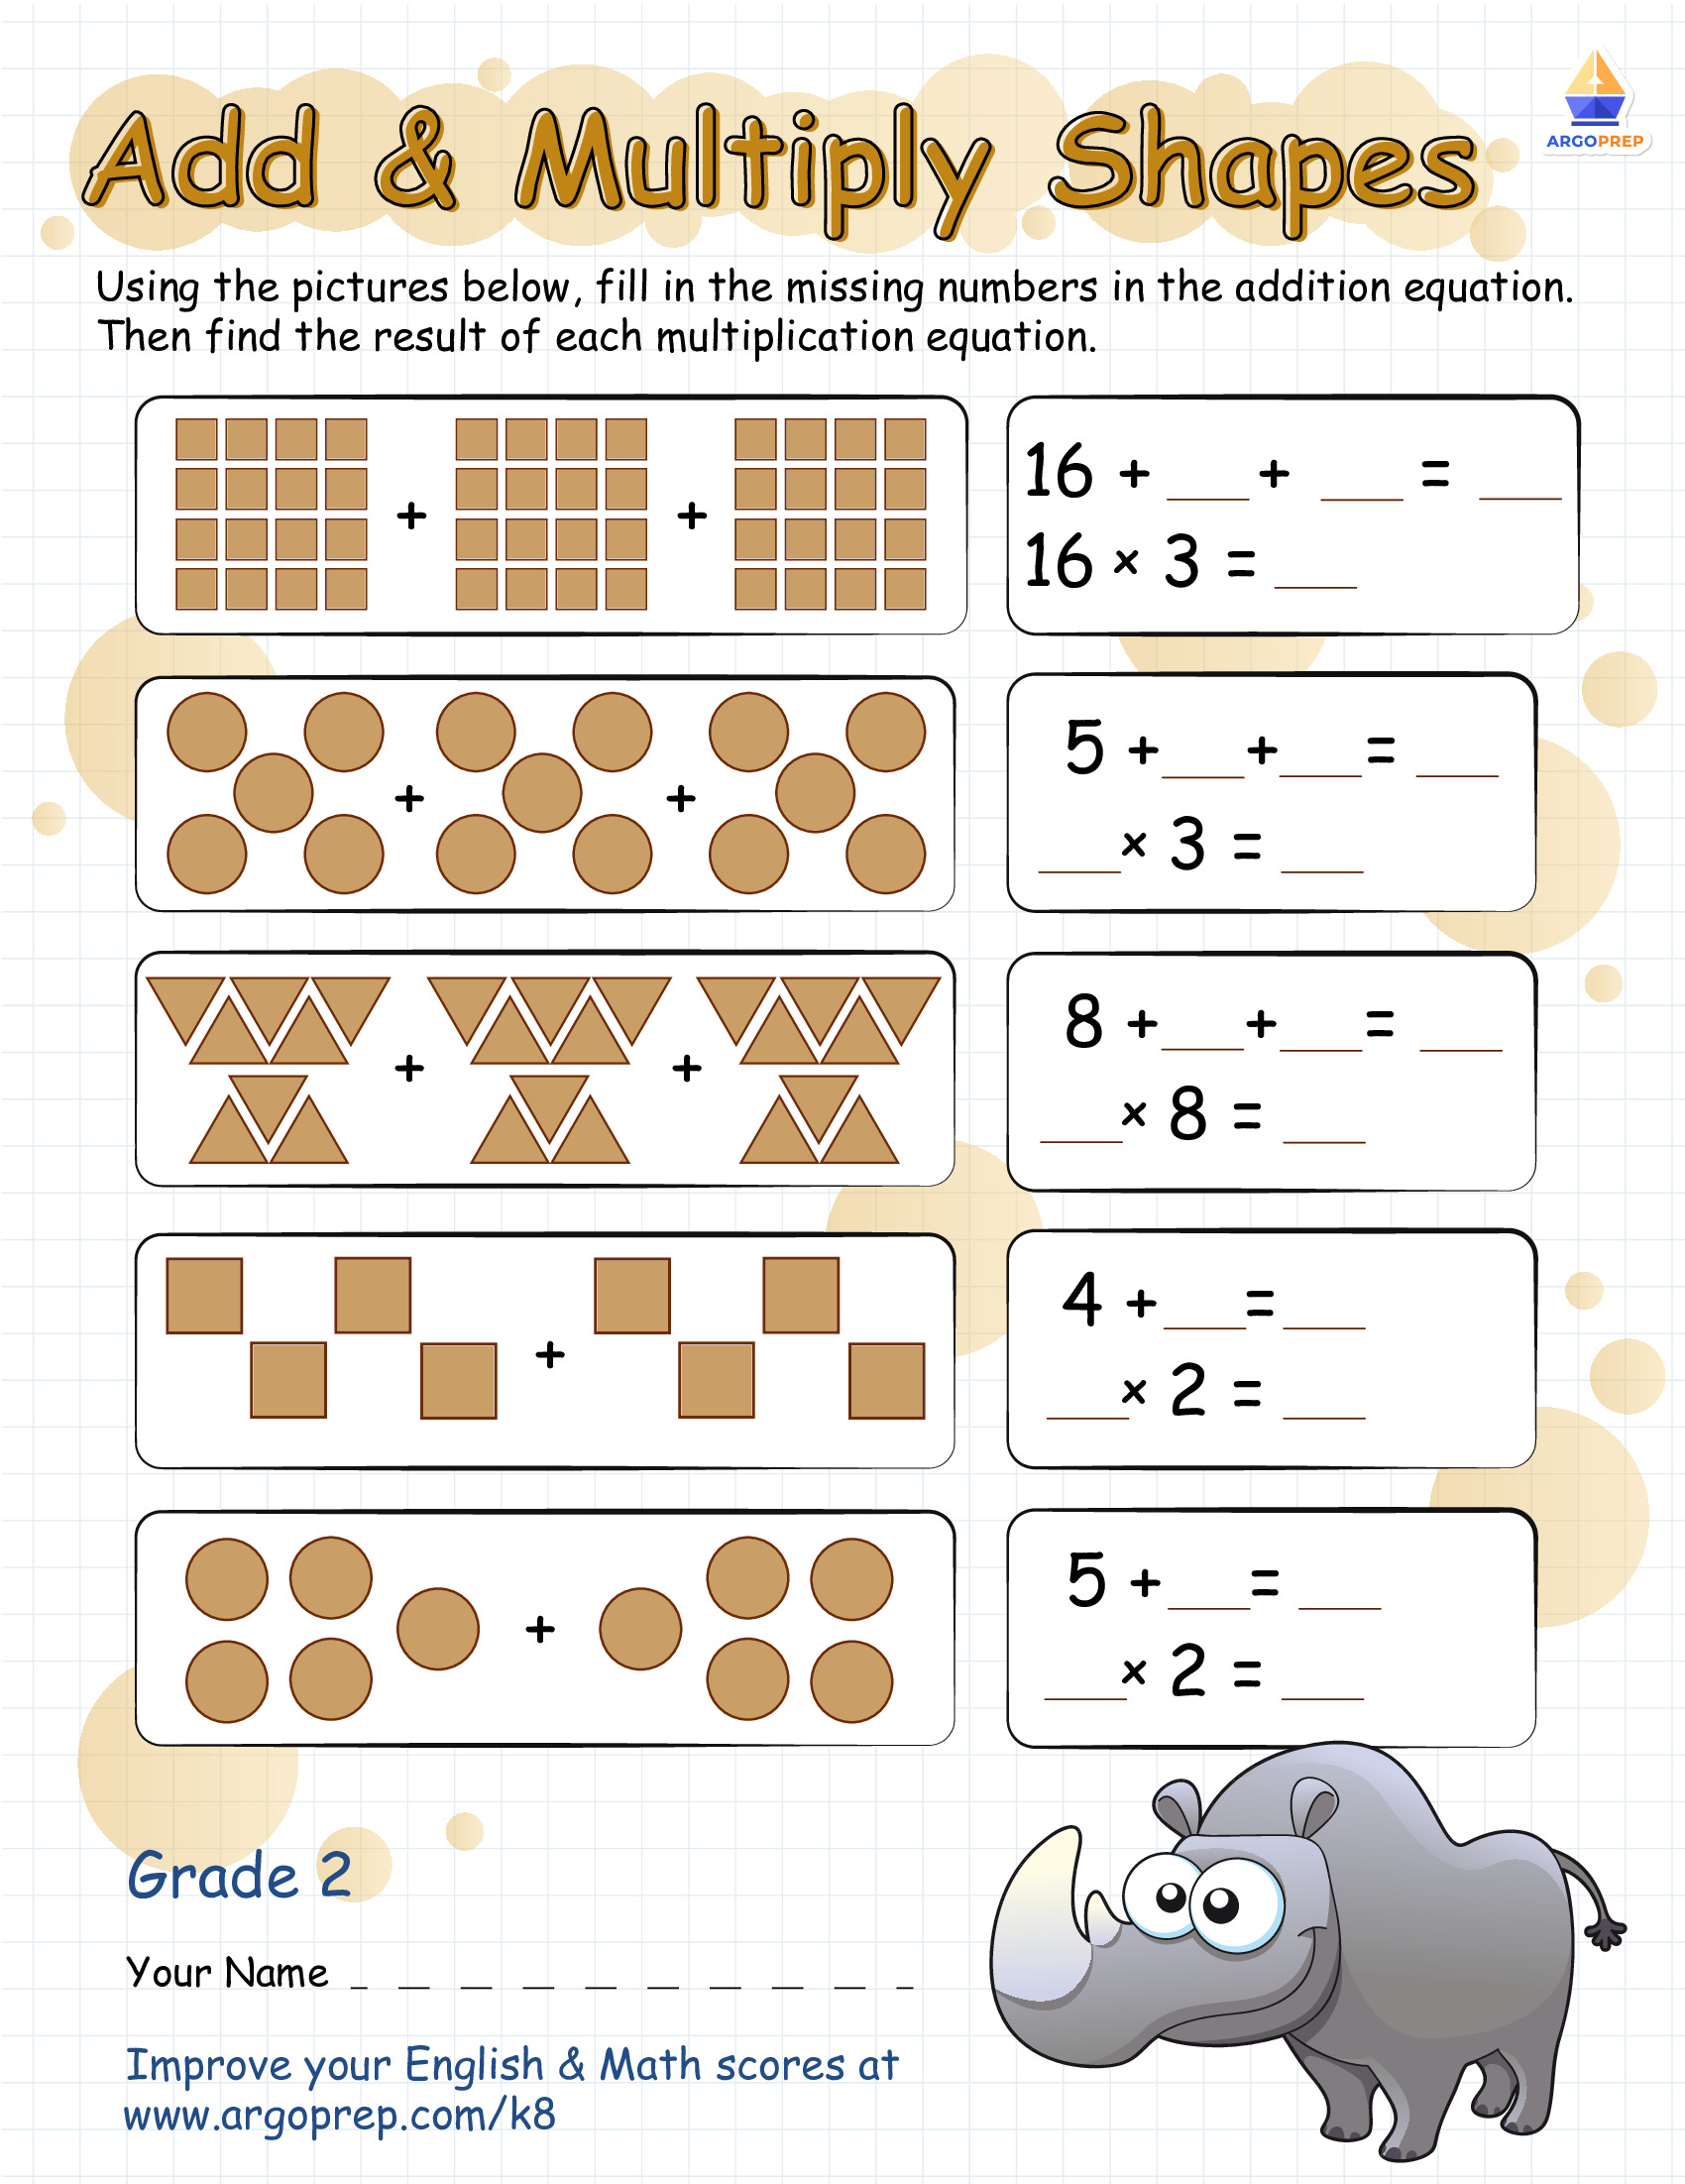 multiplication-as-repeated-addition-2nd-grade-3rd-grade-math-worksheet